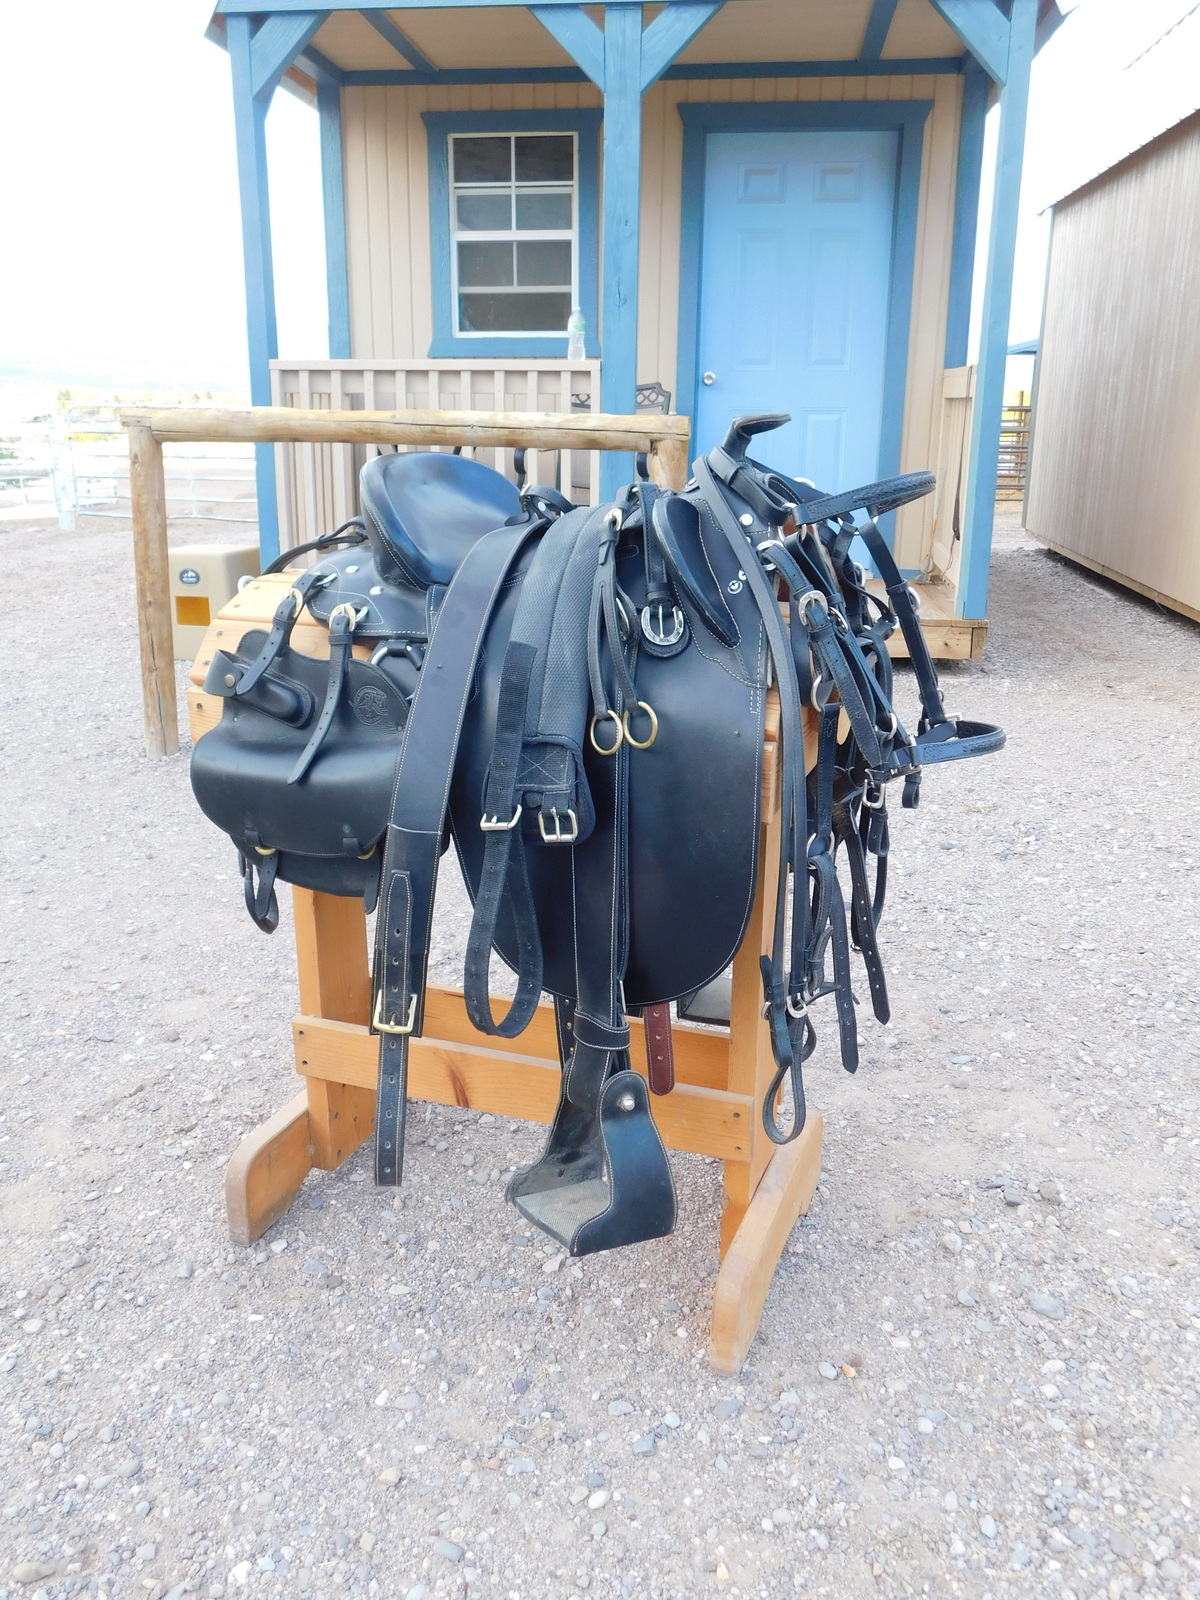 Primary image for Down Under Saddlery Al Ragusin Special Australian Saddle, extra tack as shown